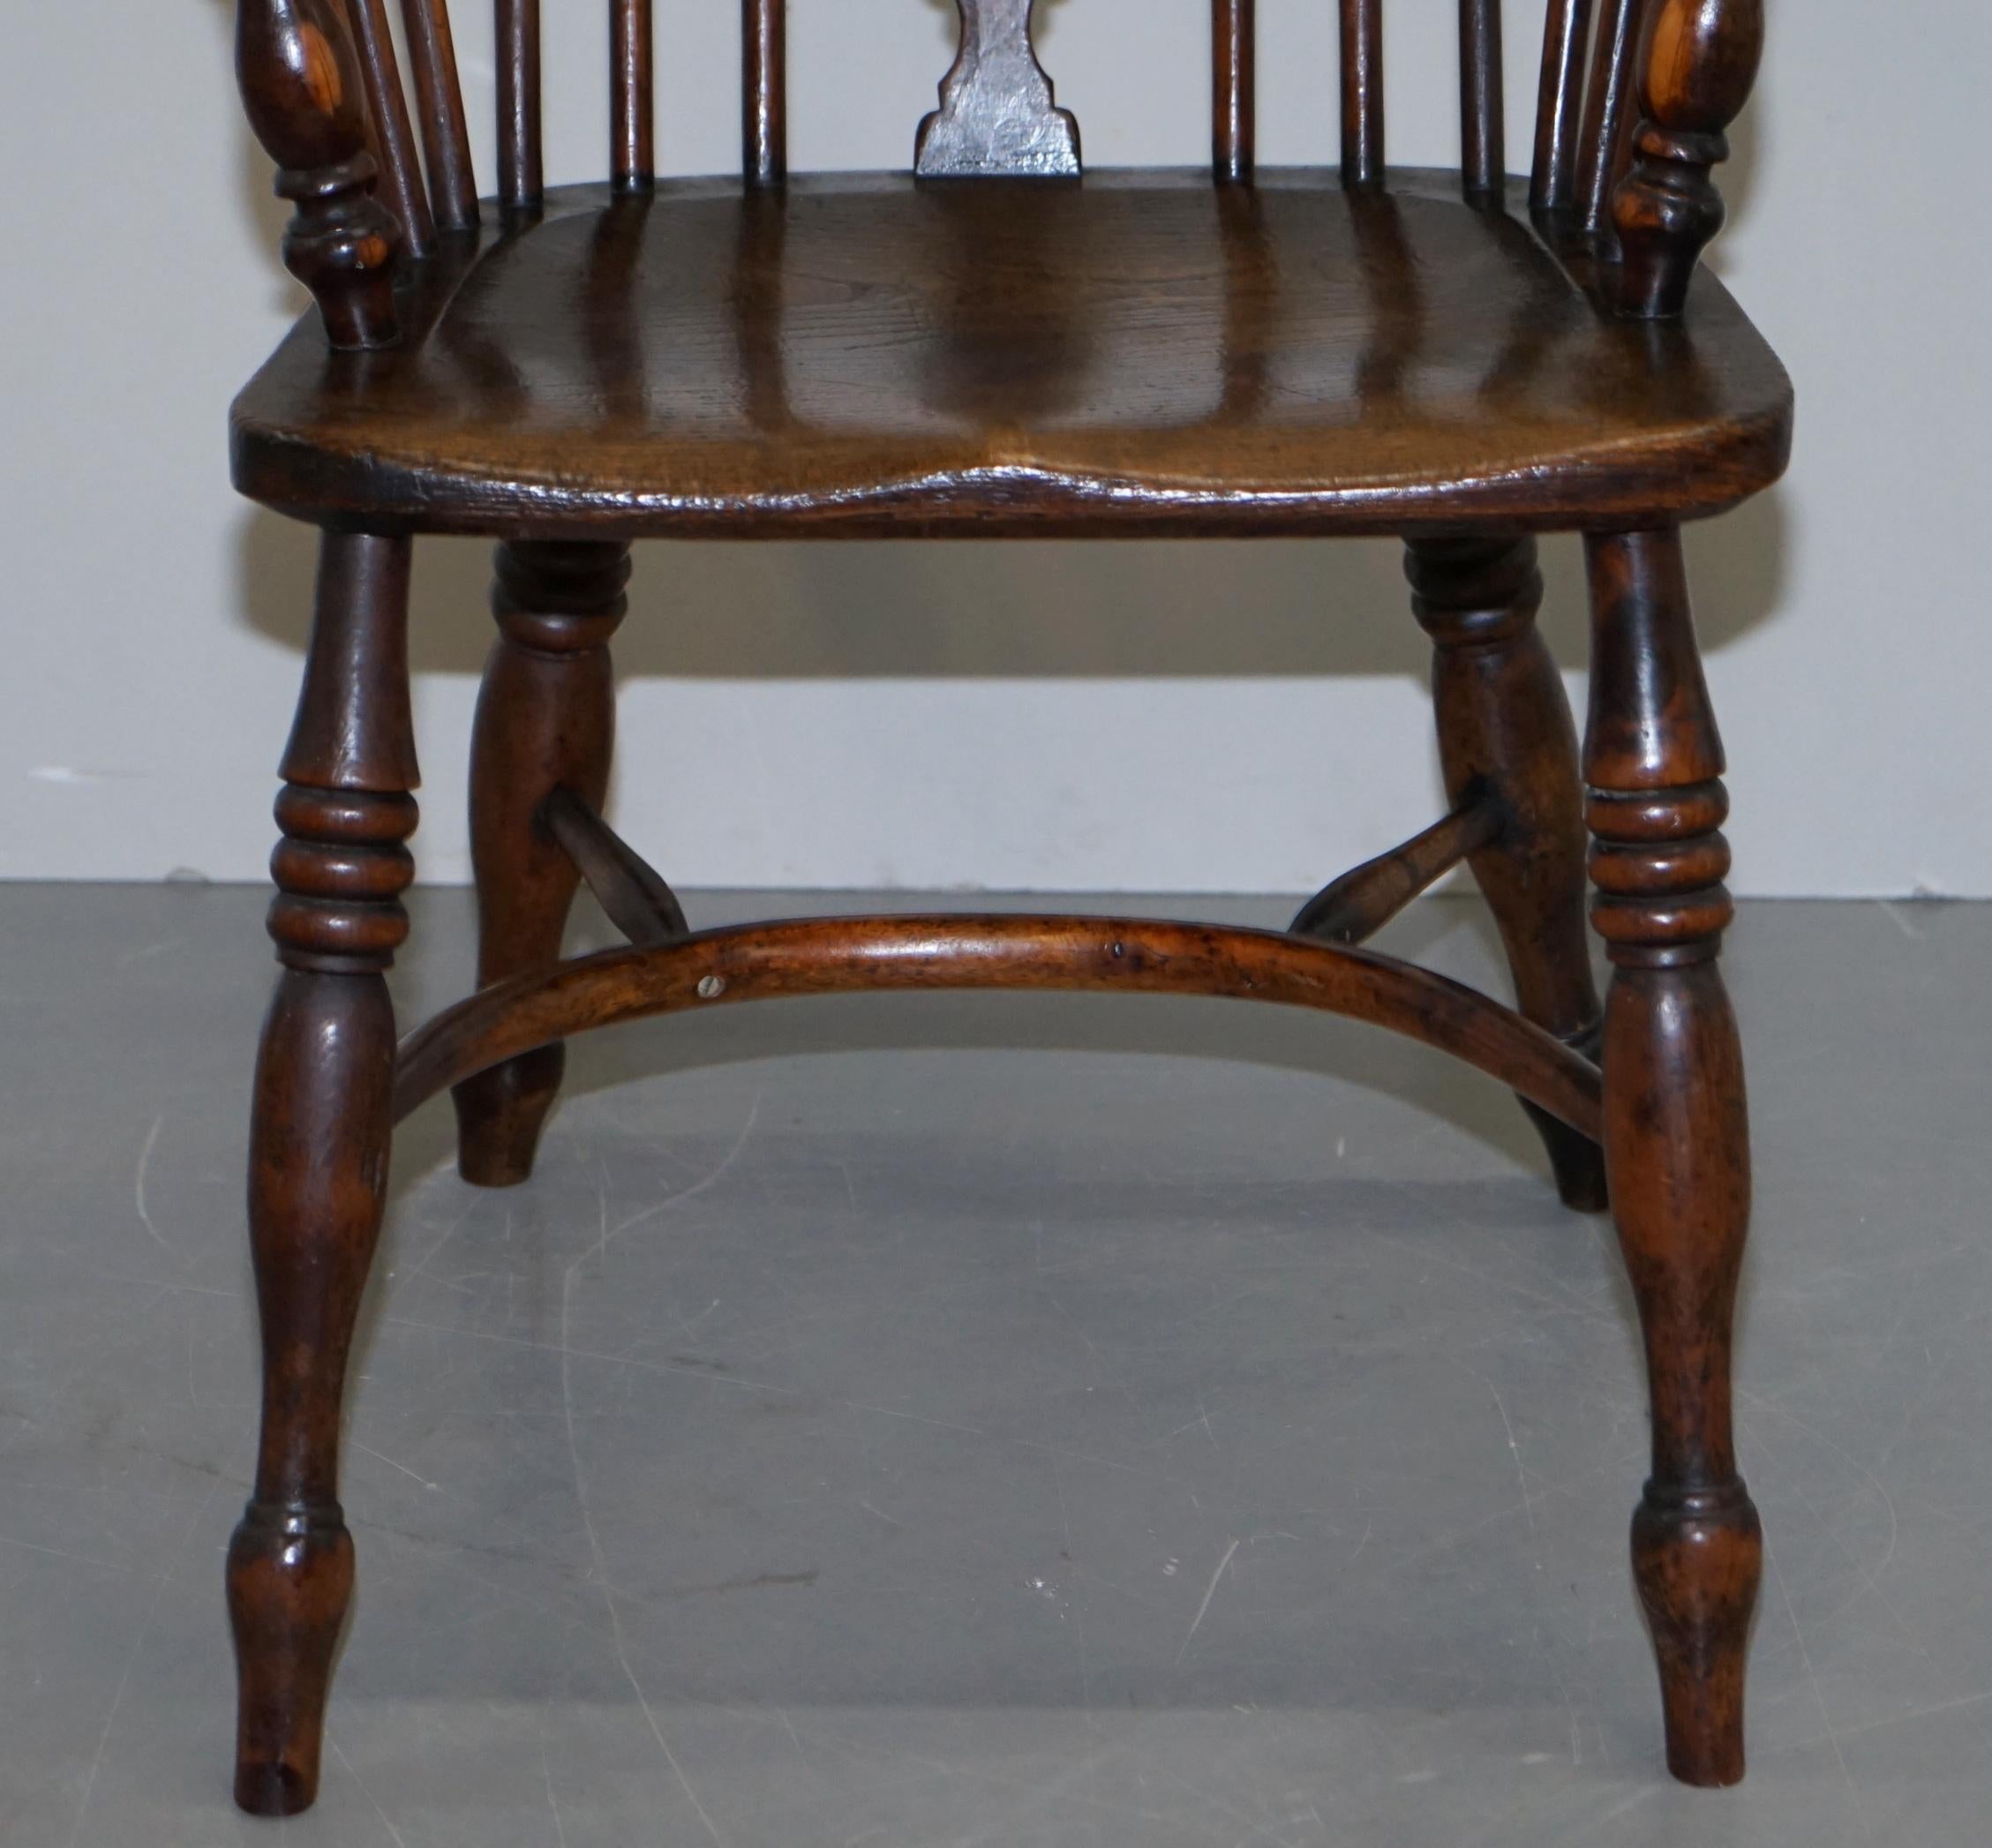 Pair of Burr Yew Wood and Elm Windsor Armchairs circa 1860 English Country House For Sale 12